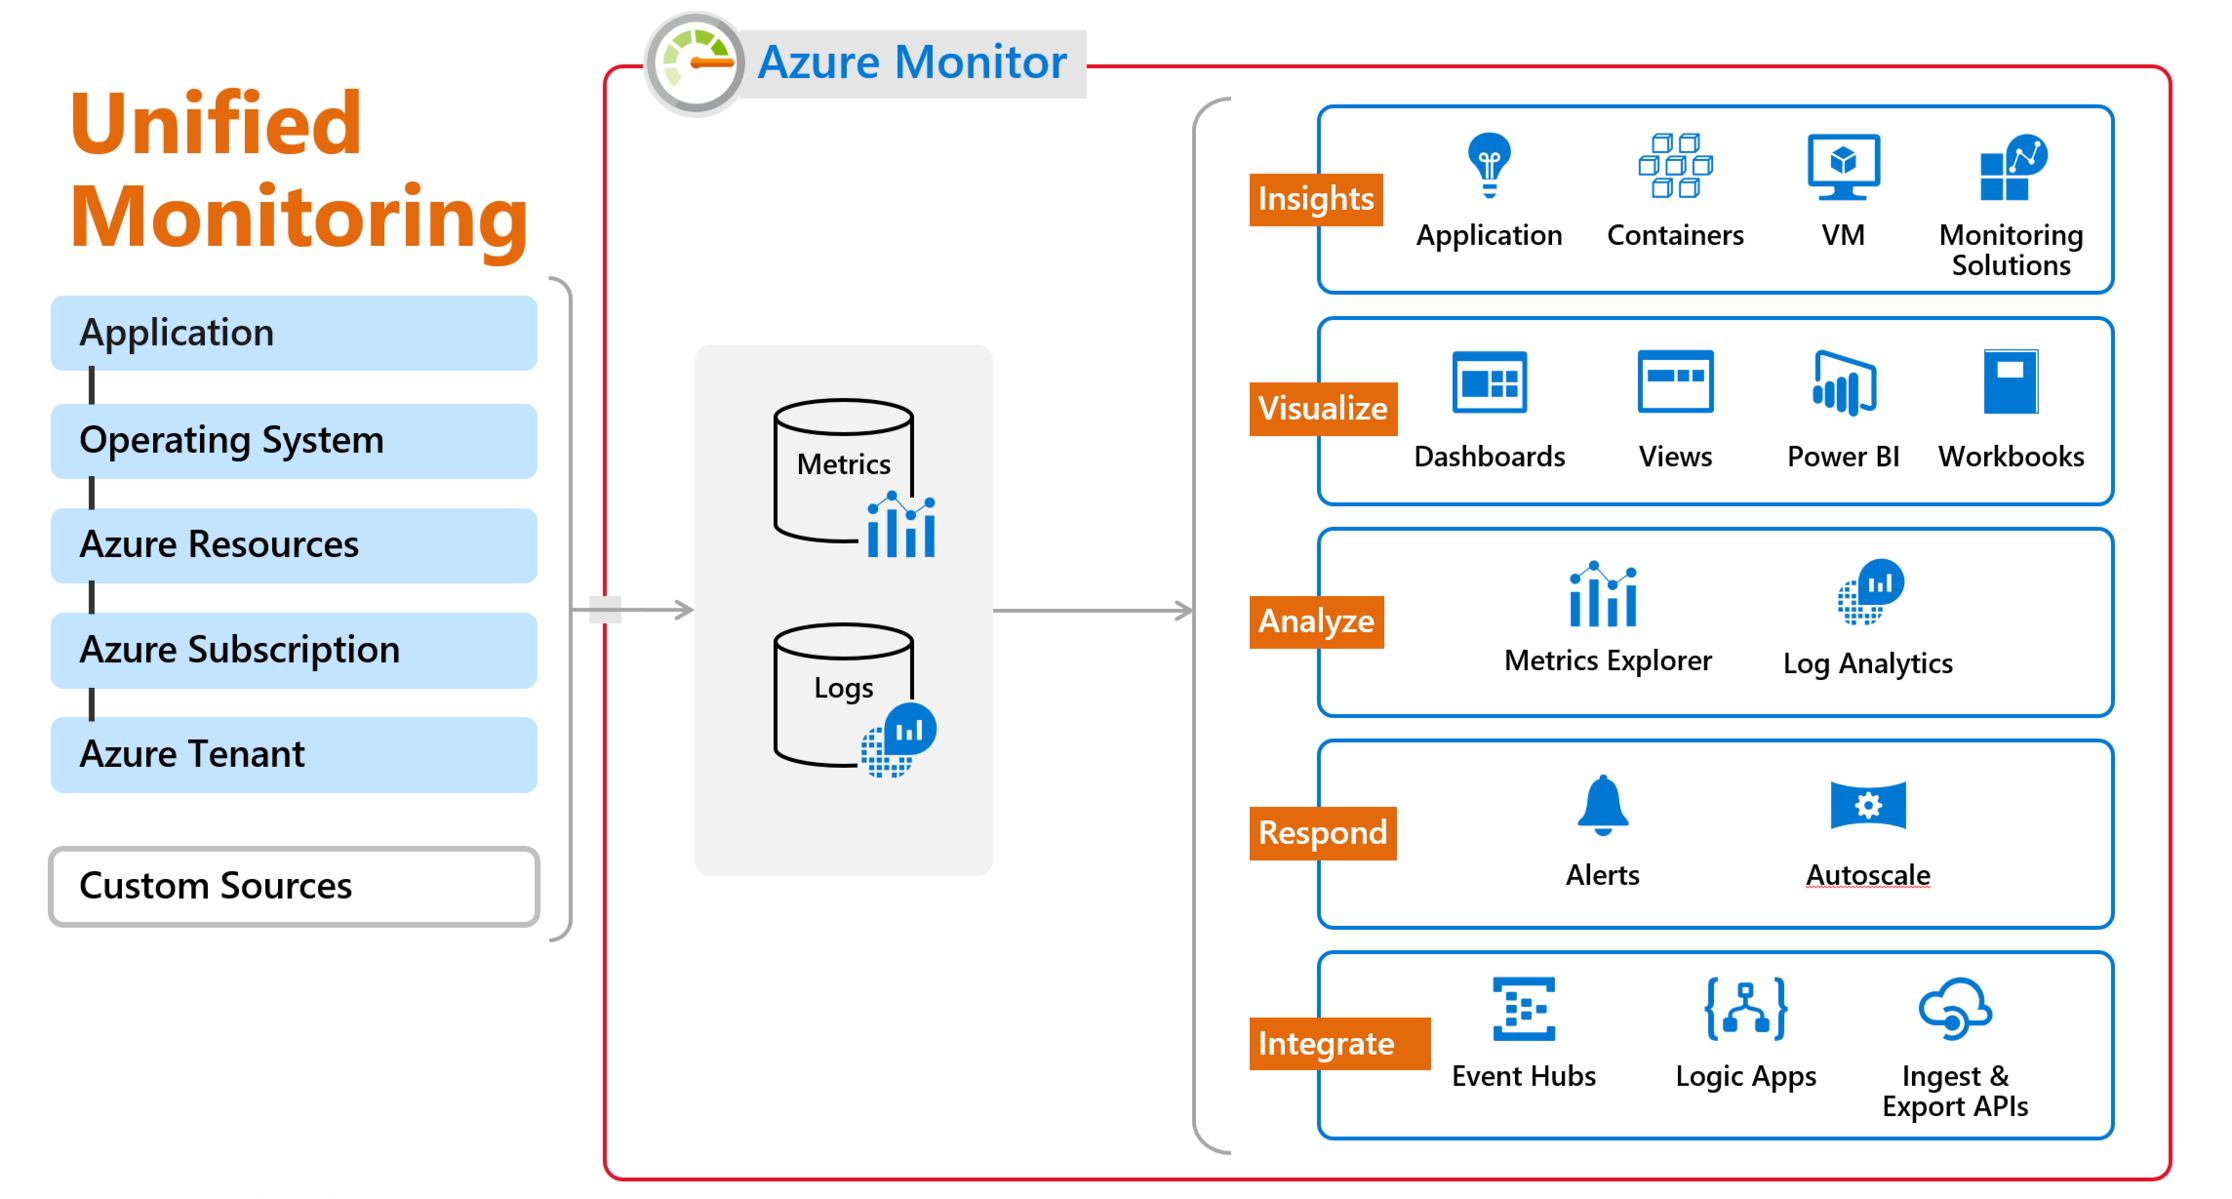 Unified Monitoring